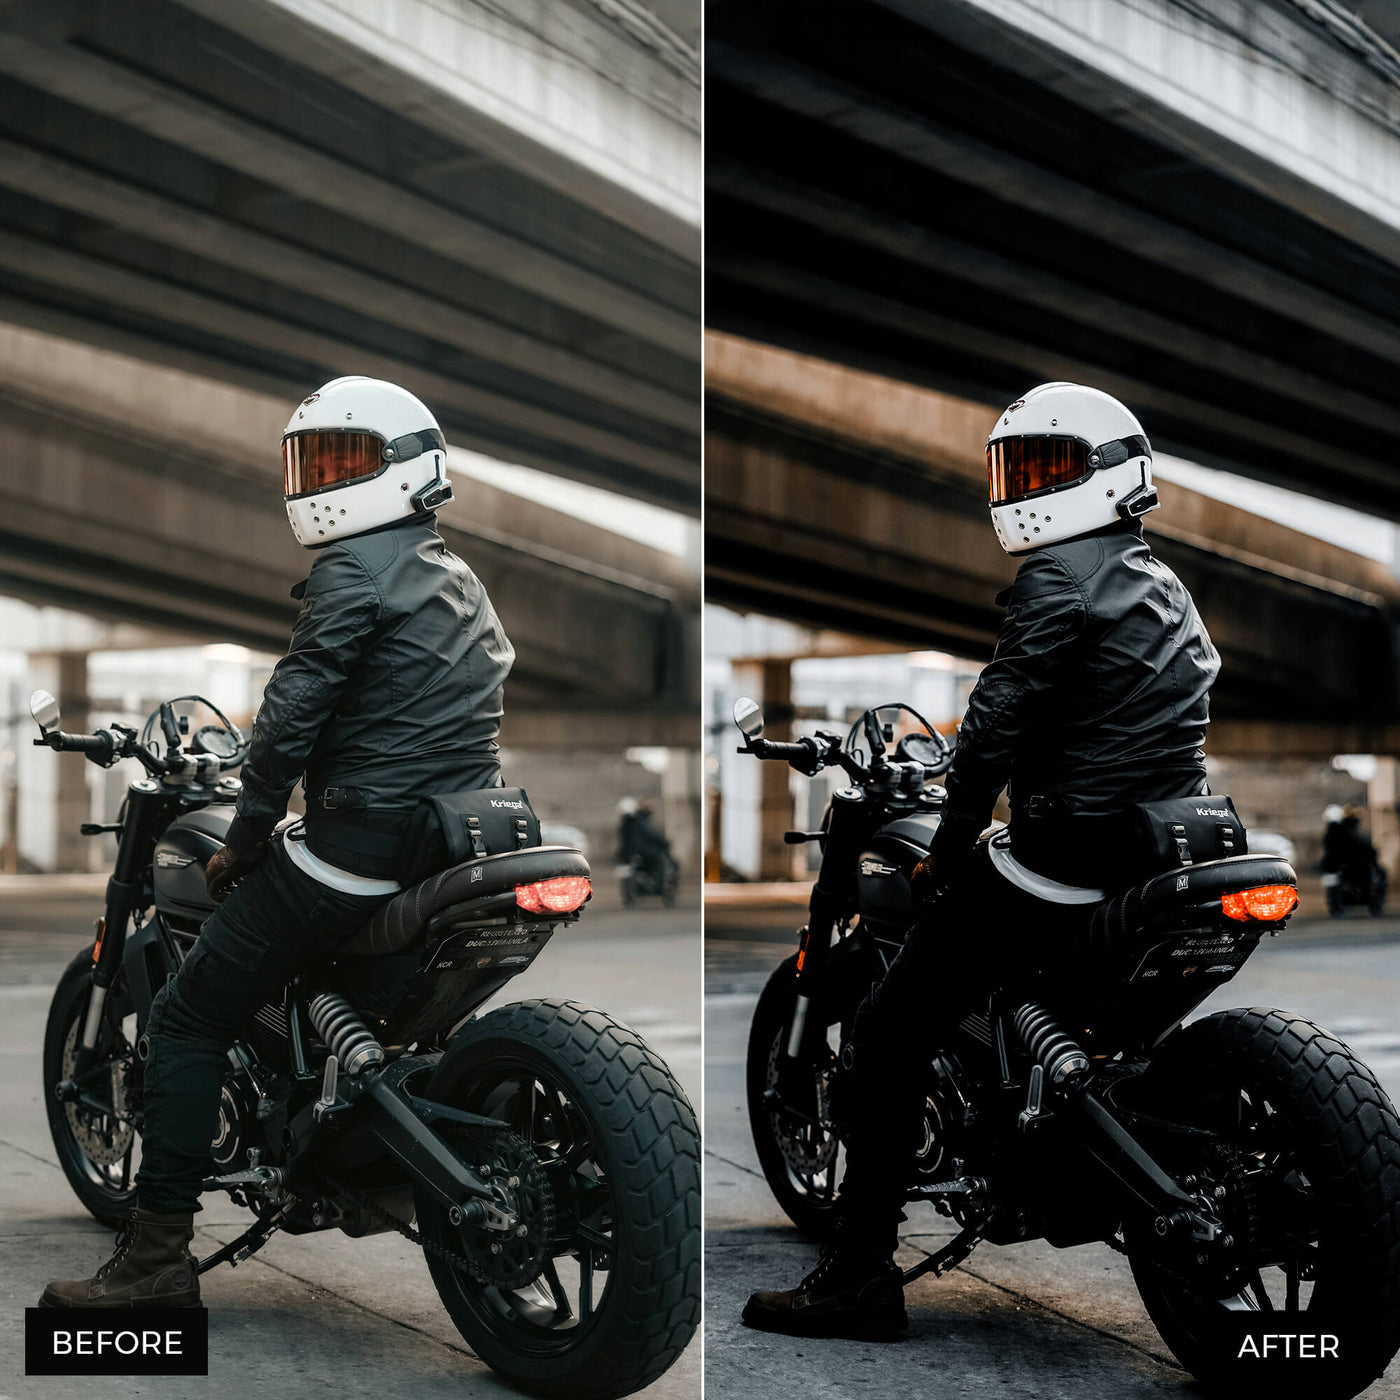 Mens Lifestyle Lightroom Presets Collection